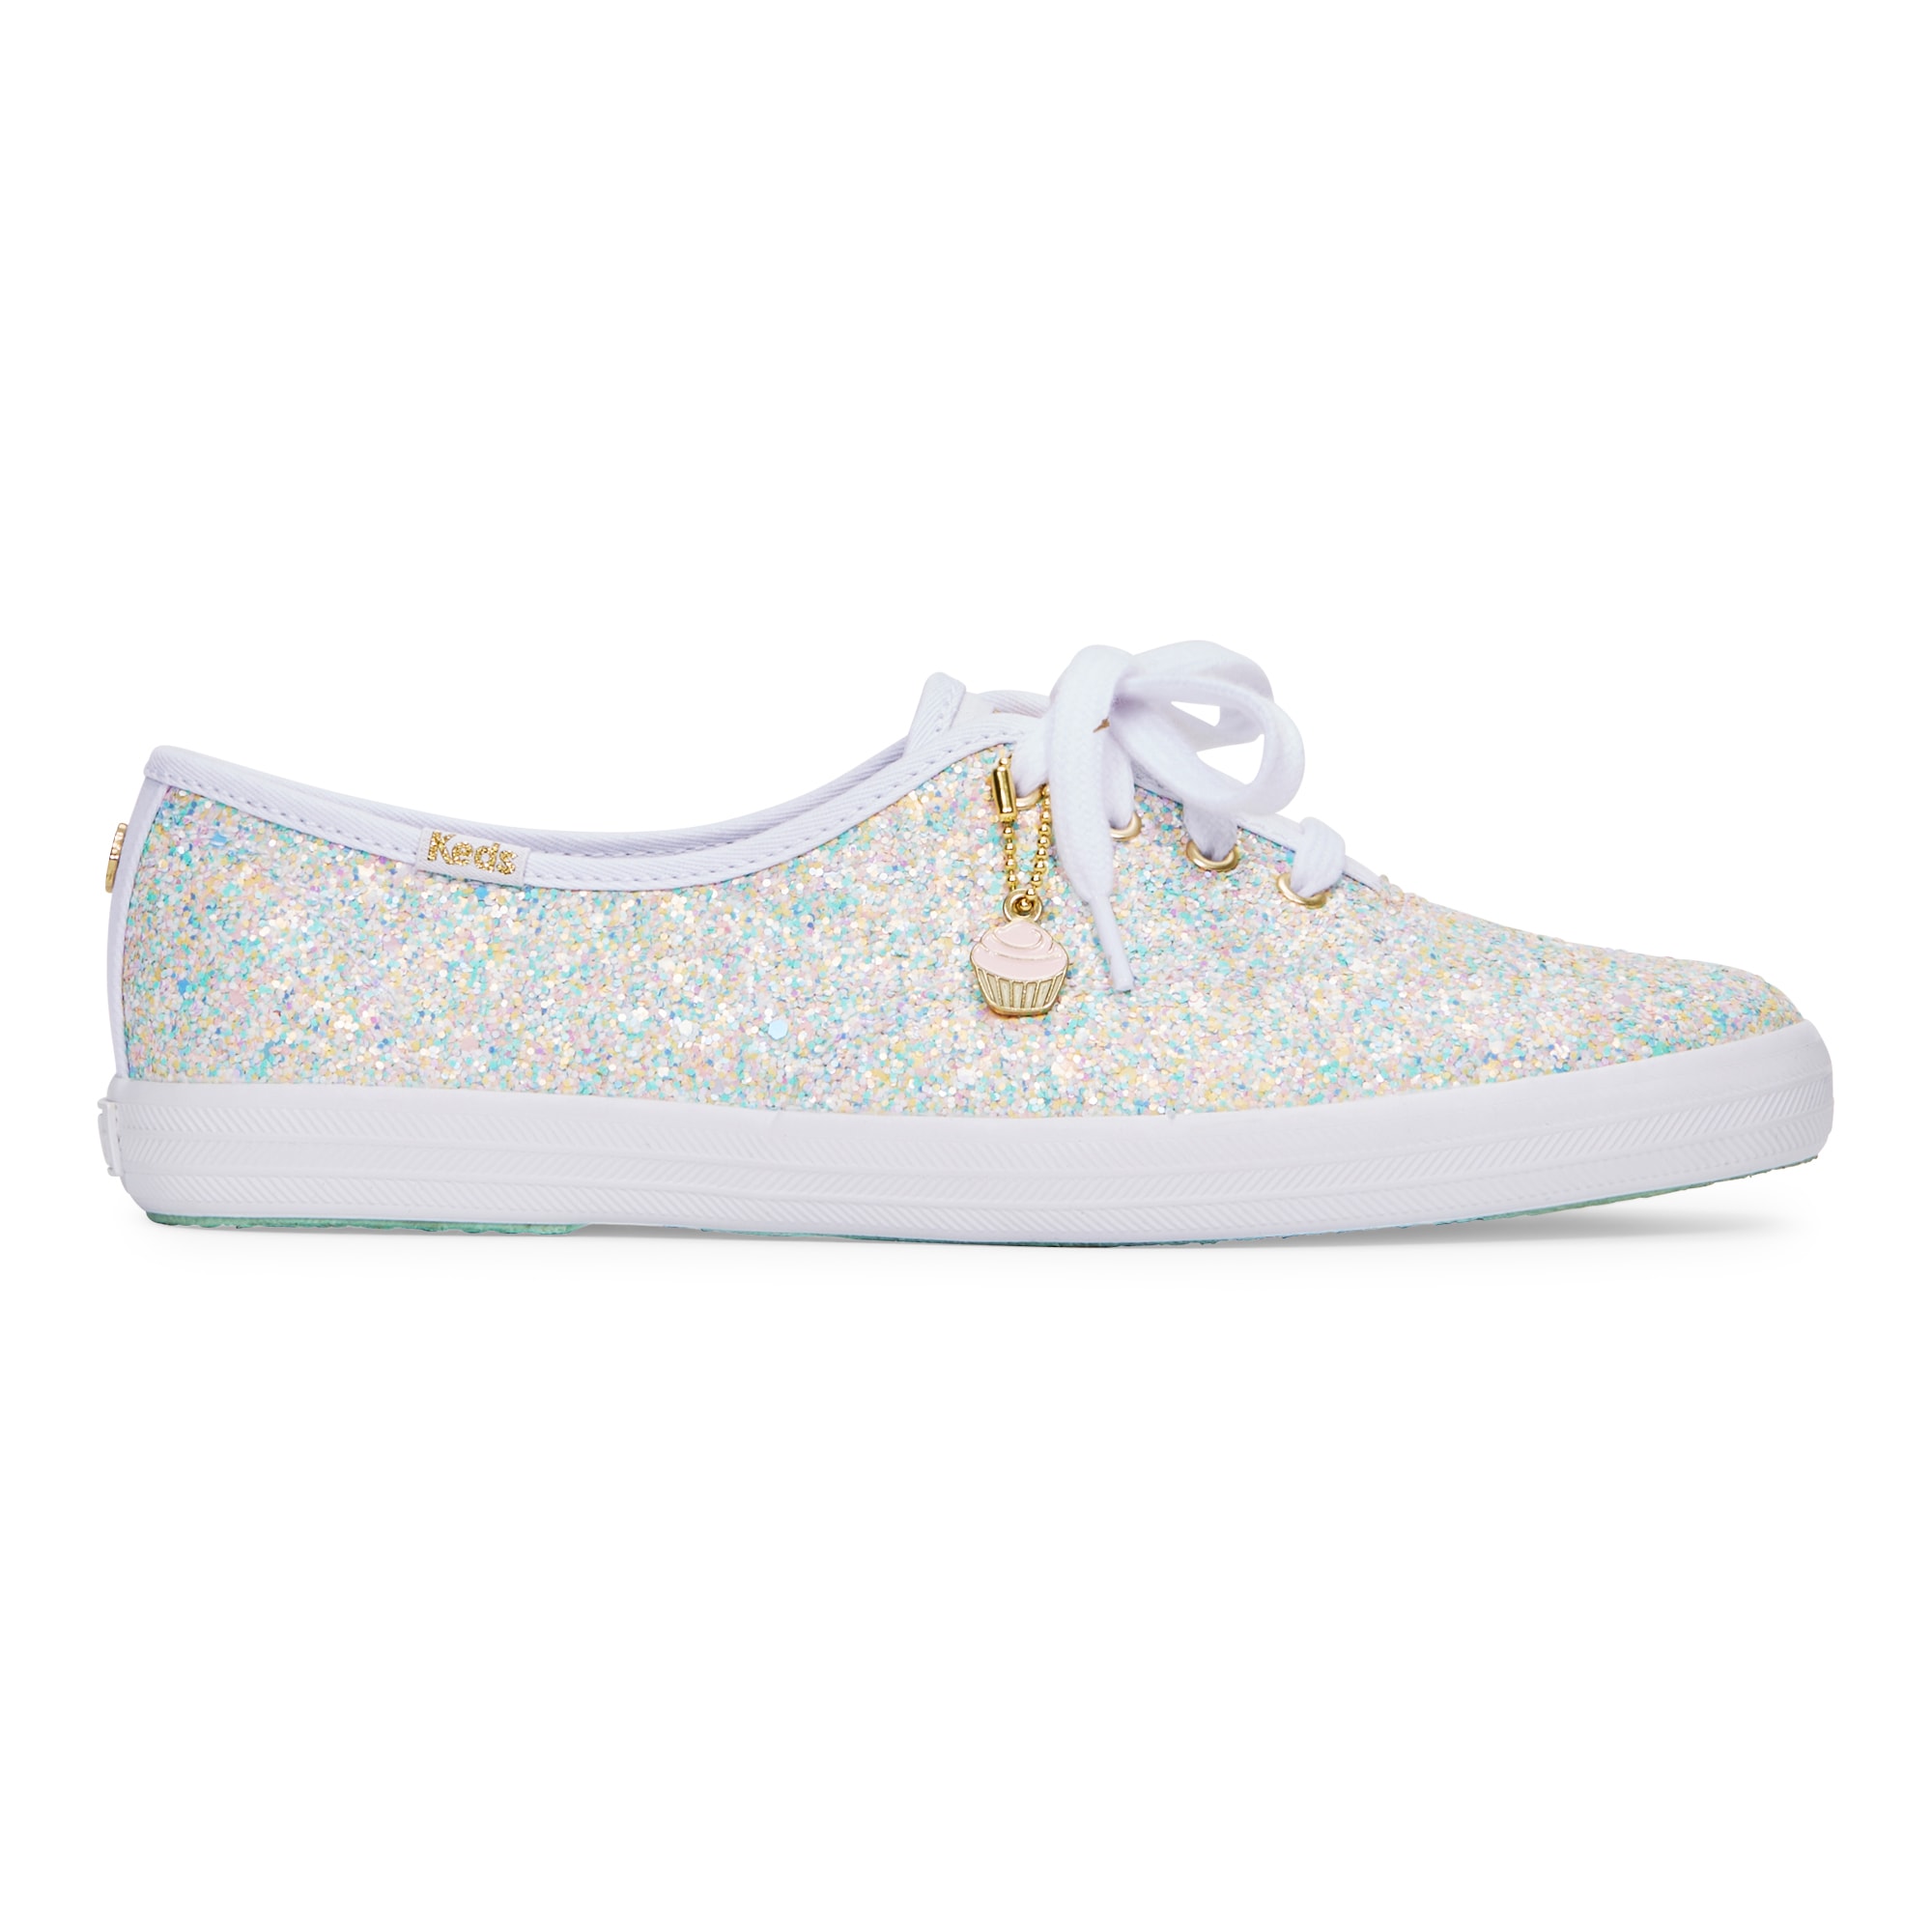 Shoes: Women's, Men's & Kids Shoes from Top Brands | Keds